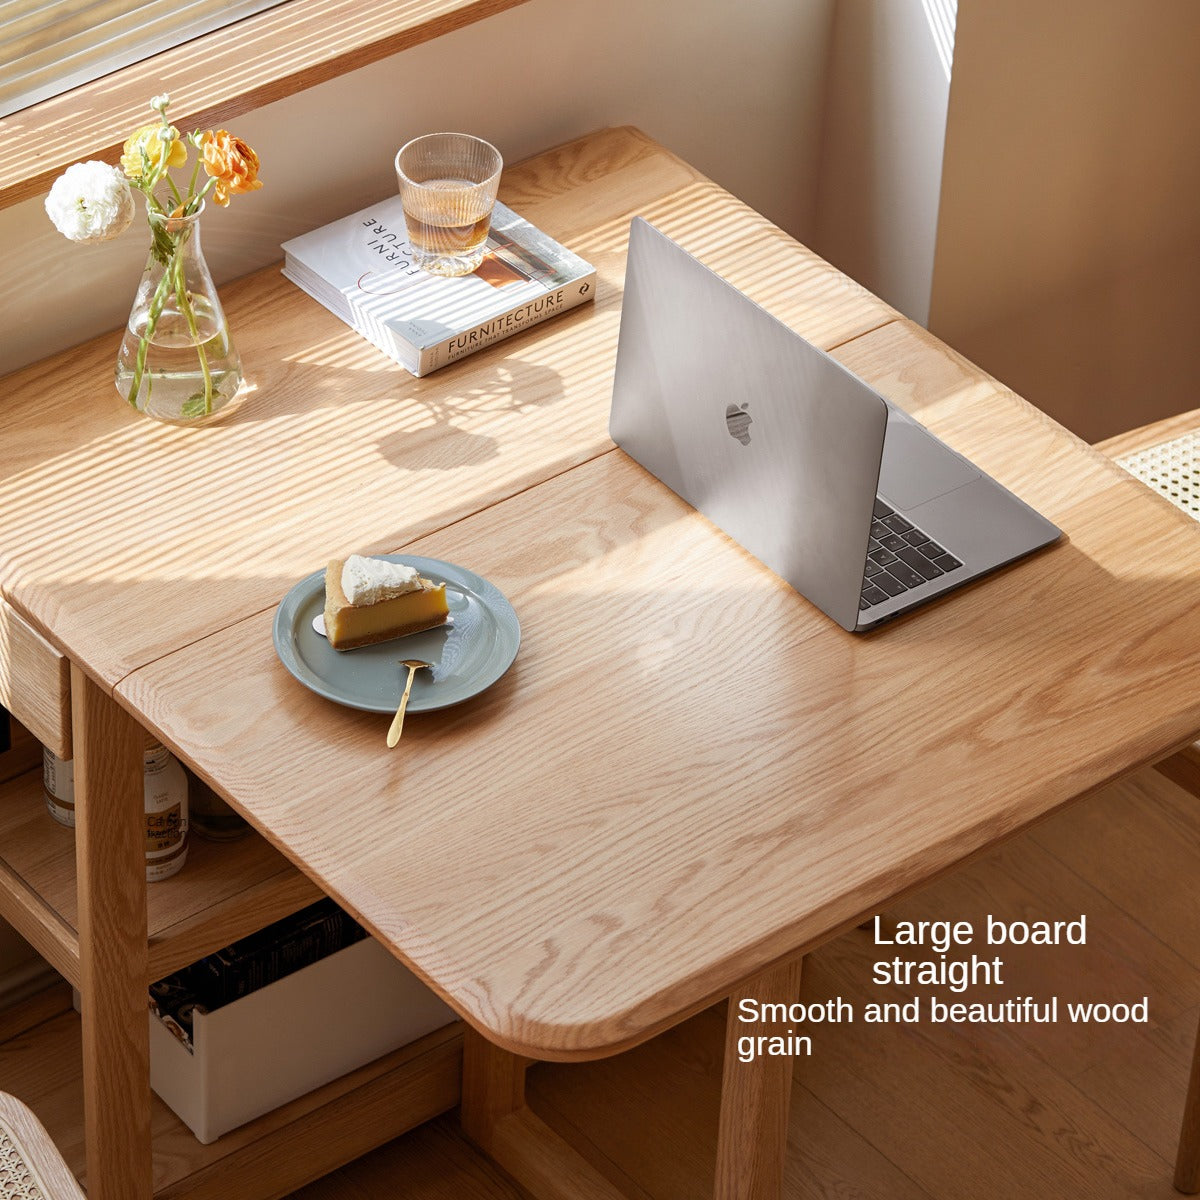 Oak Solid wood folding multi-functional storage telescopic dining table"